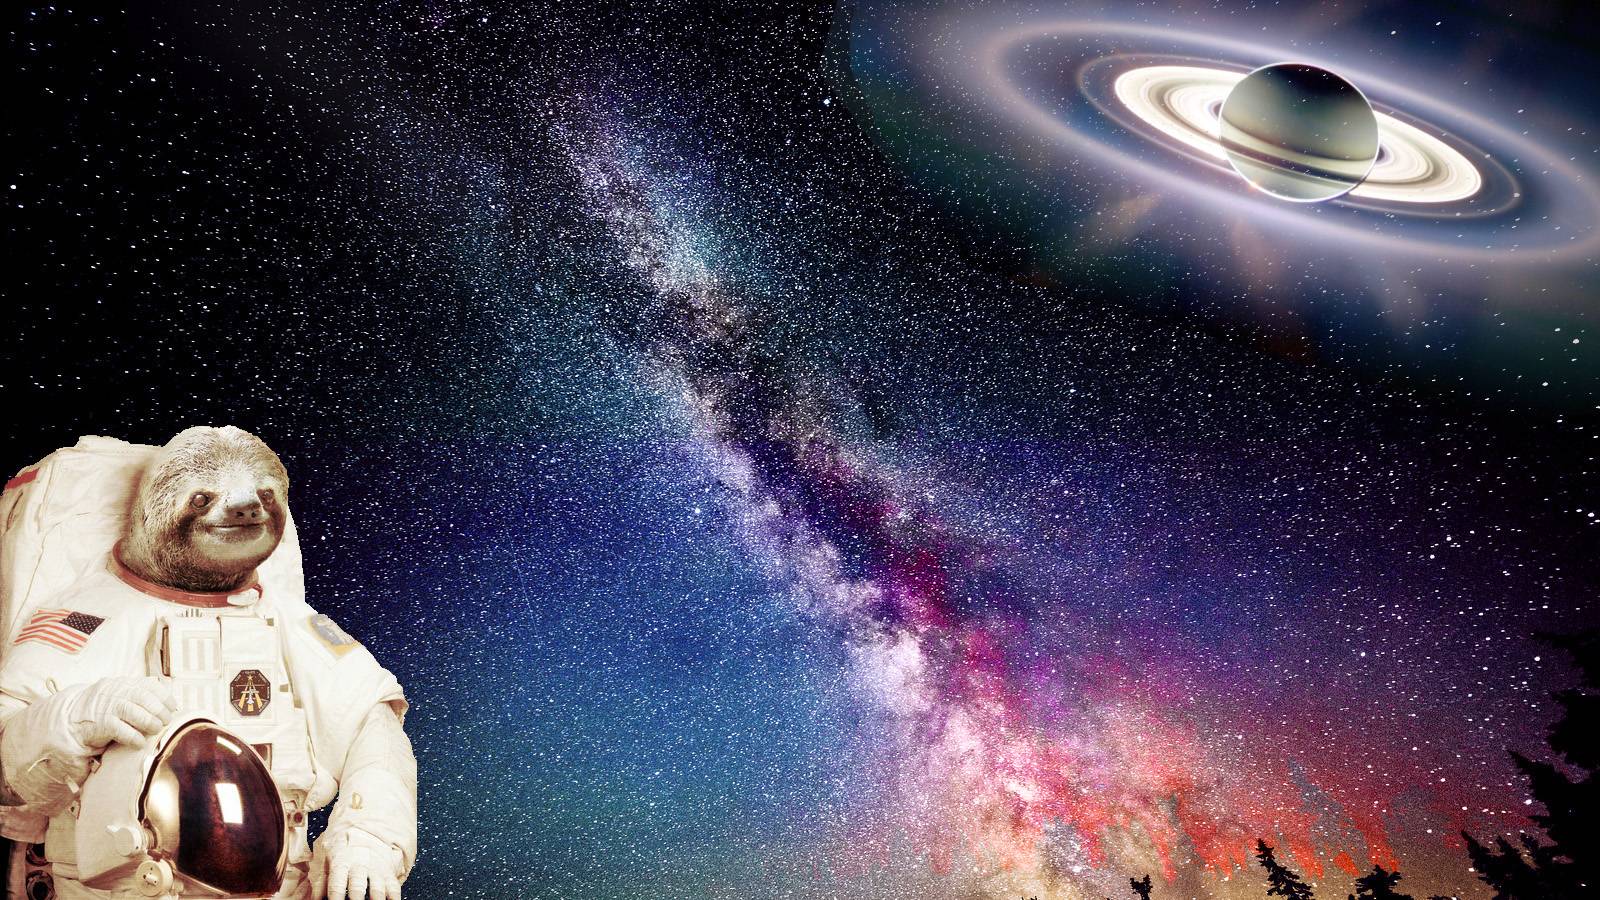 Sloths in Space: Wallpaper Edition